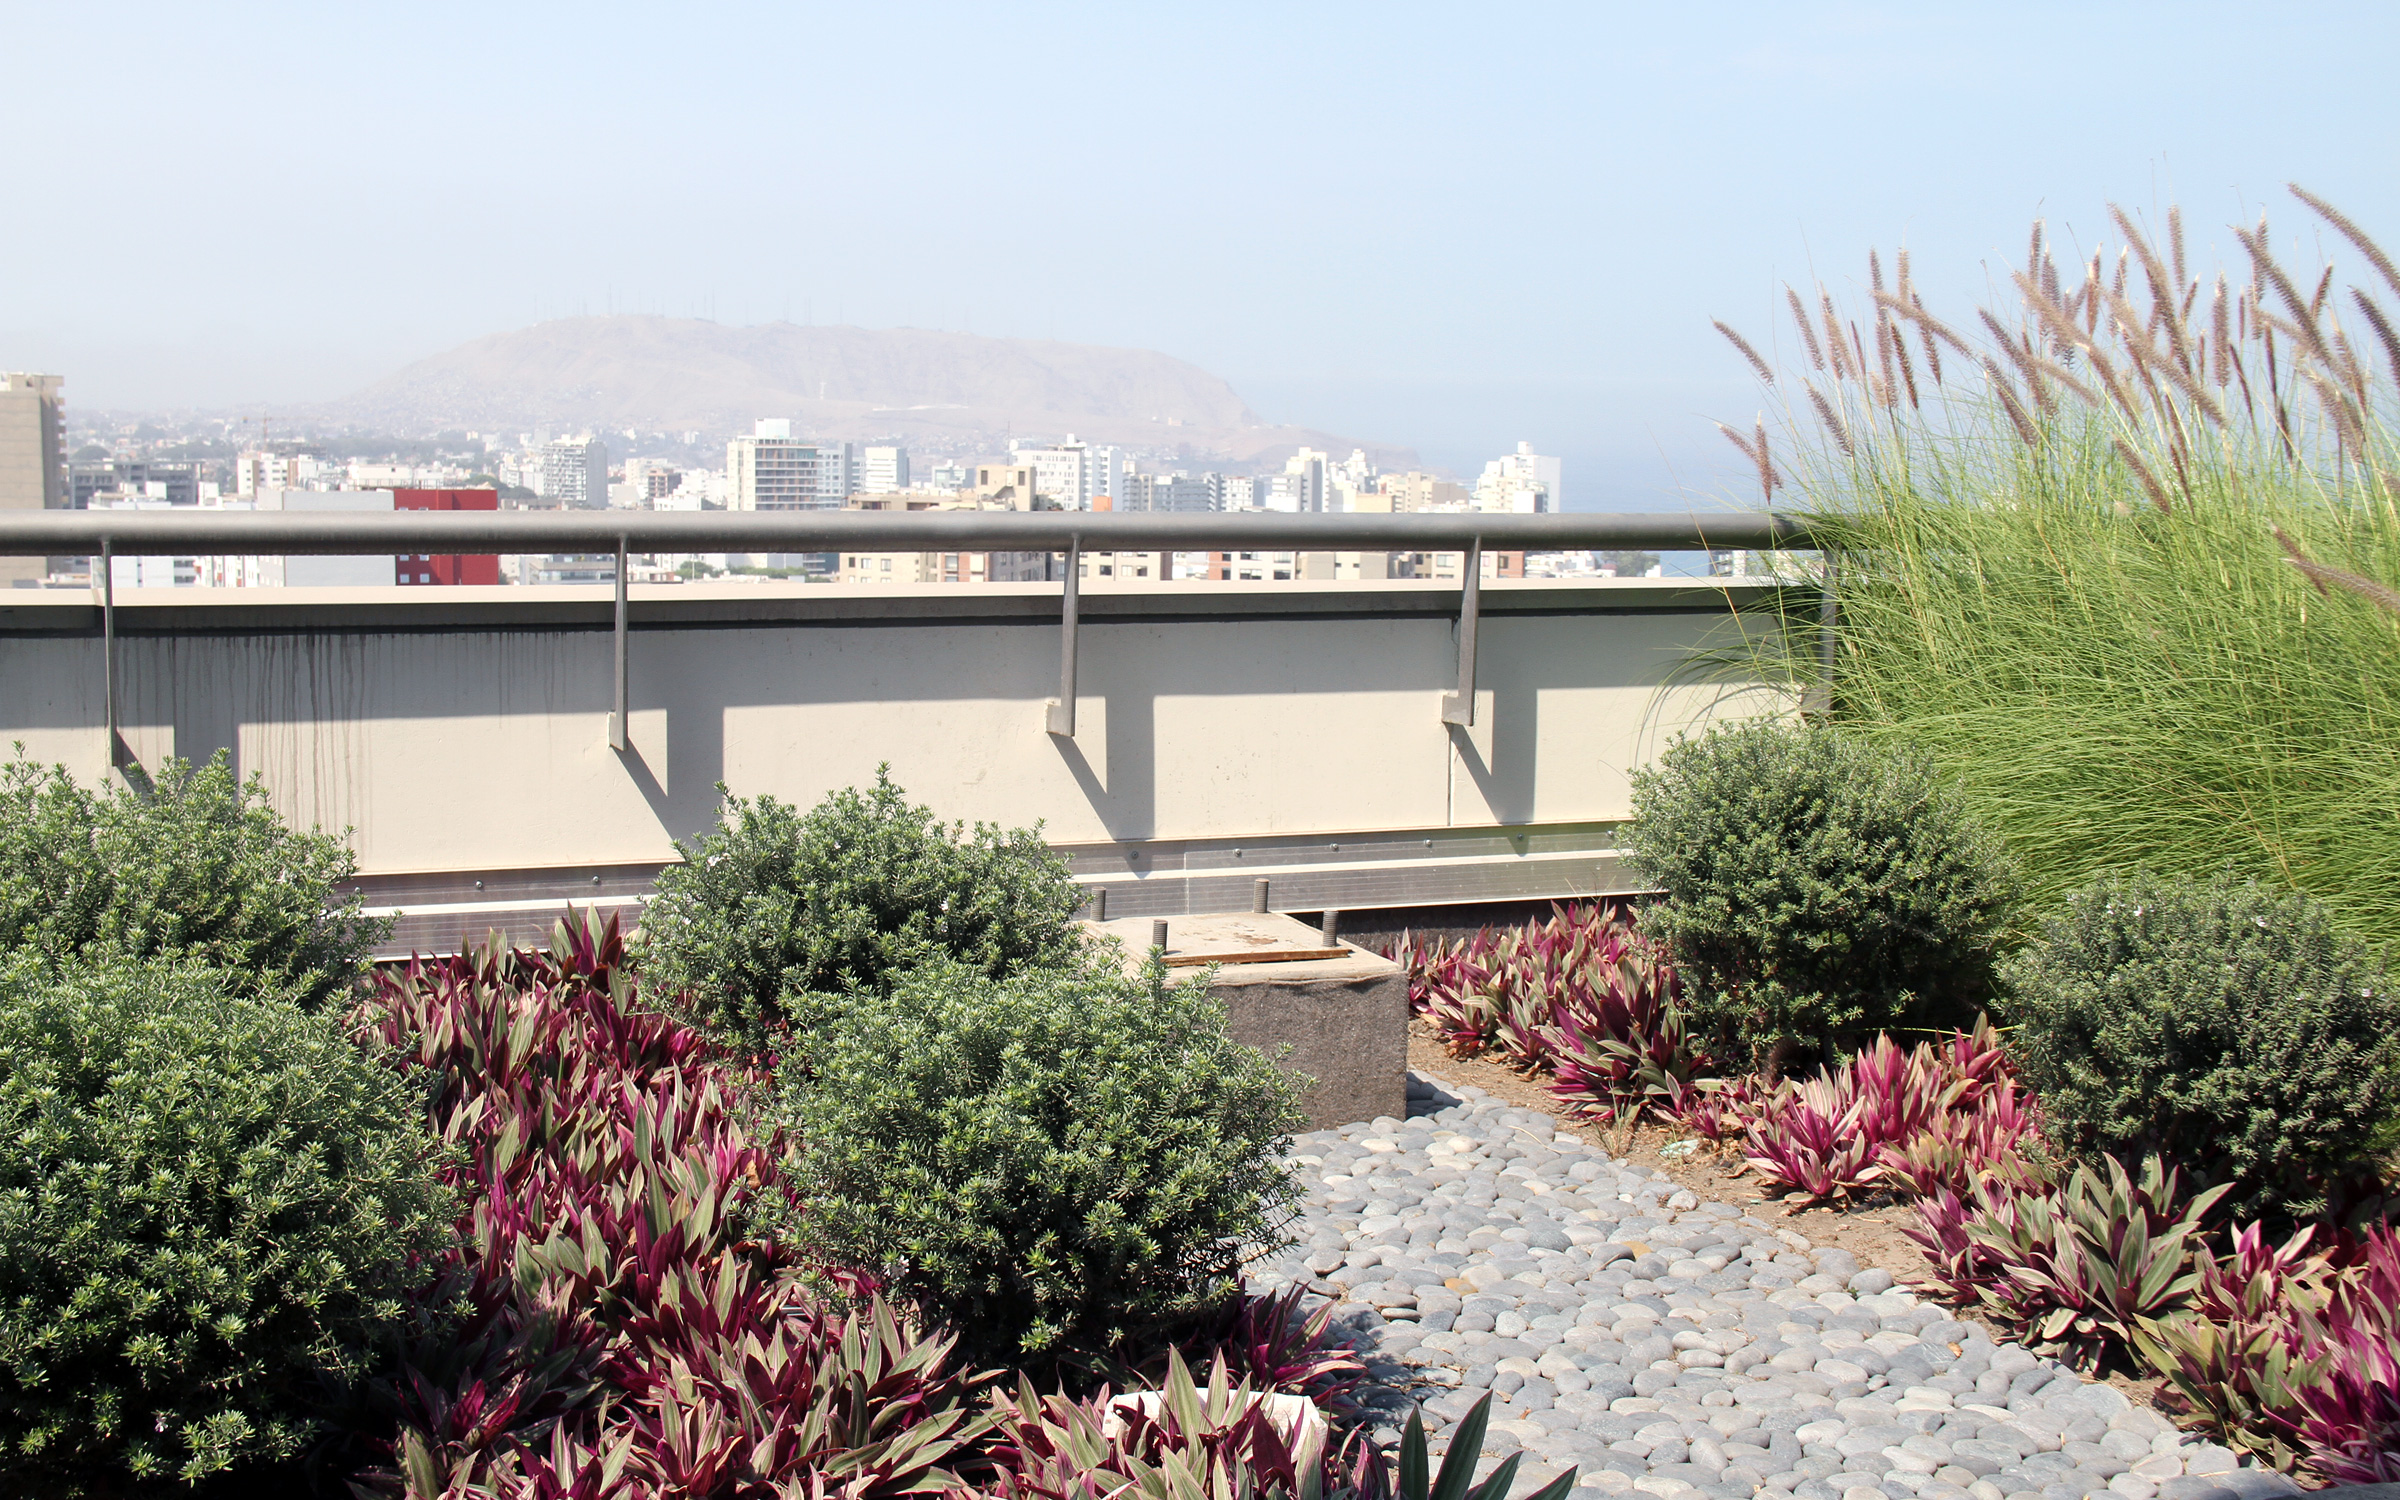 Roof garden with shrubs, ornamental grasses and small bushes in the city